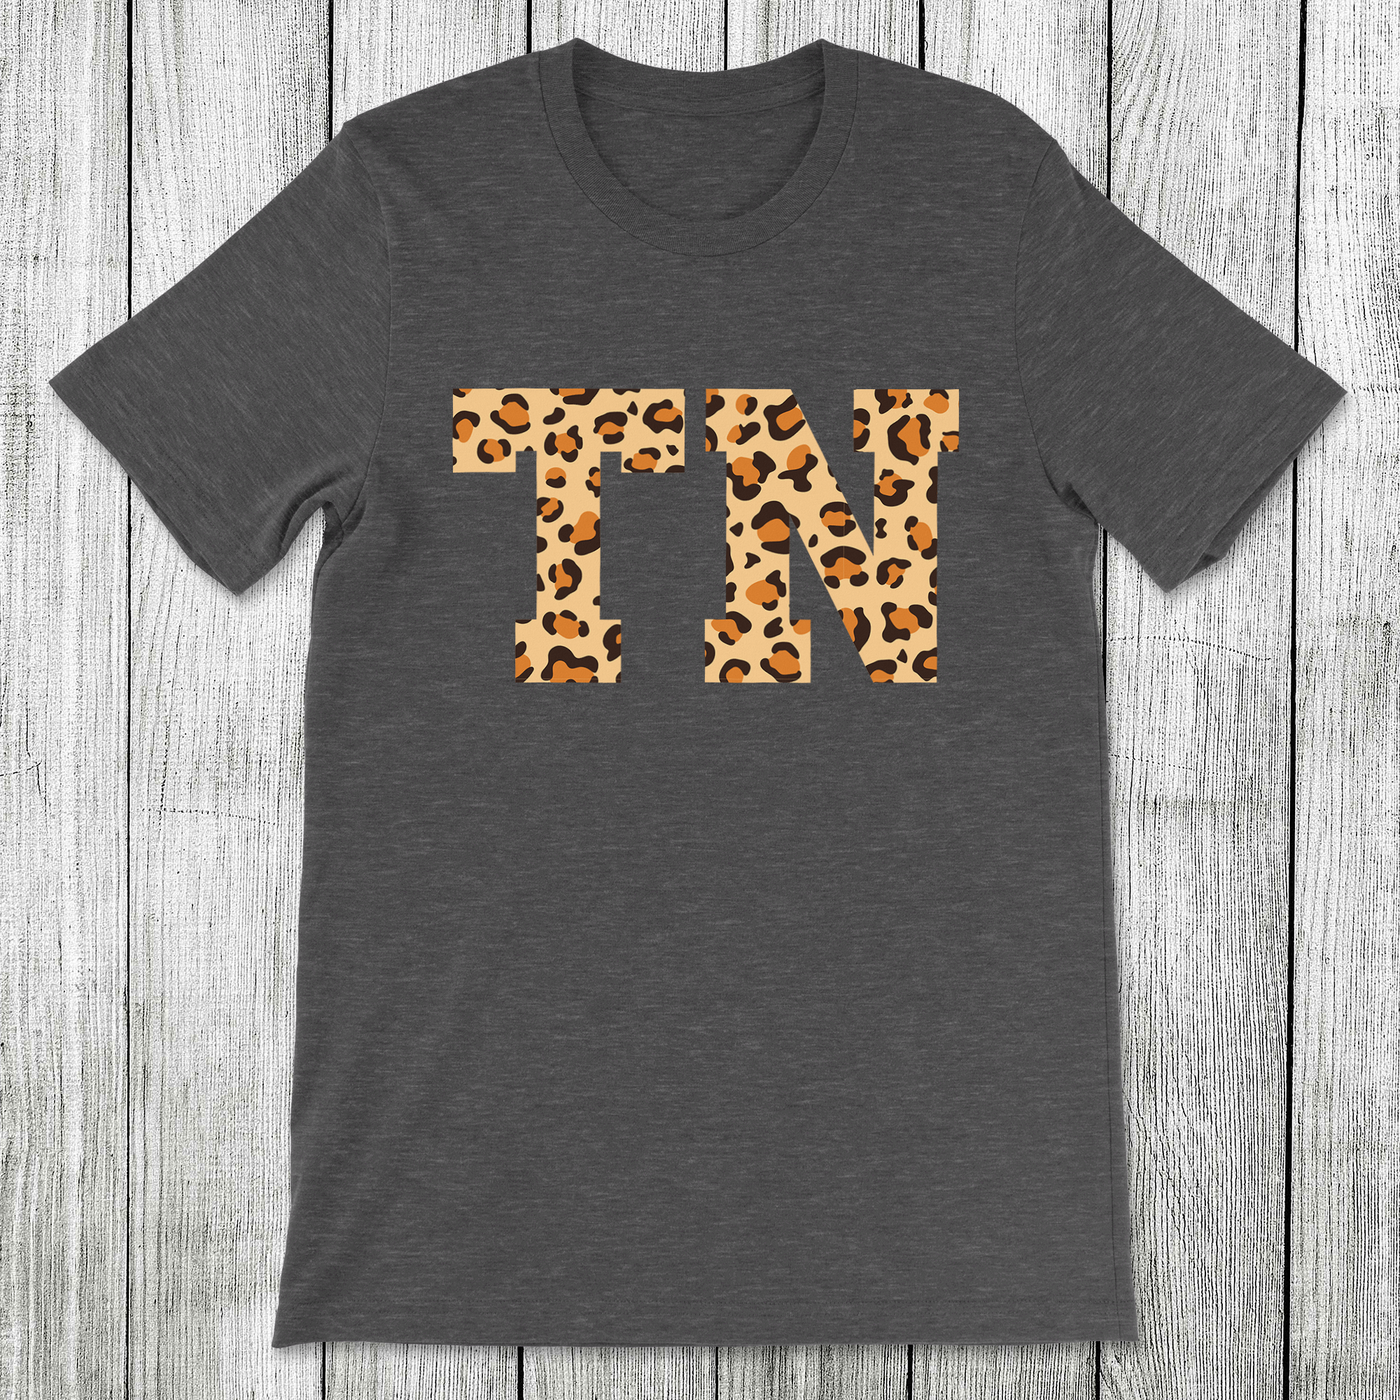 Daydream Tees State Leopard Tennessee